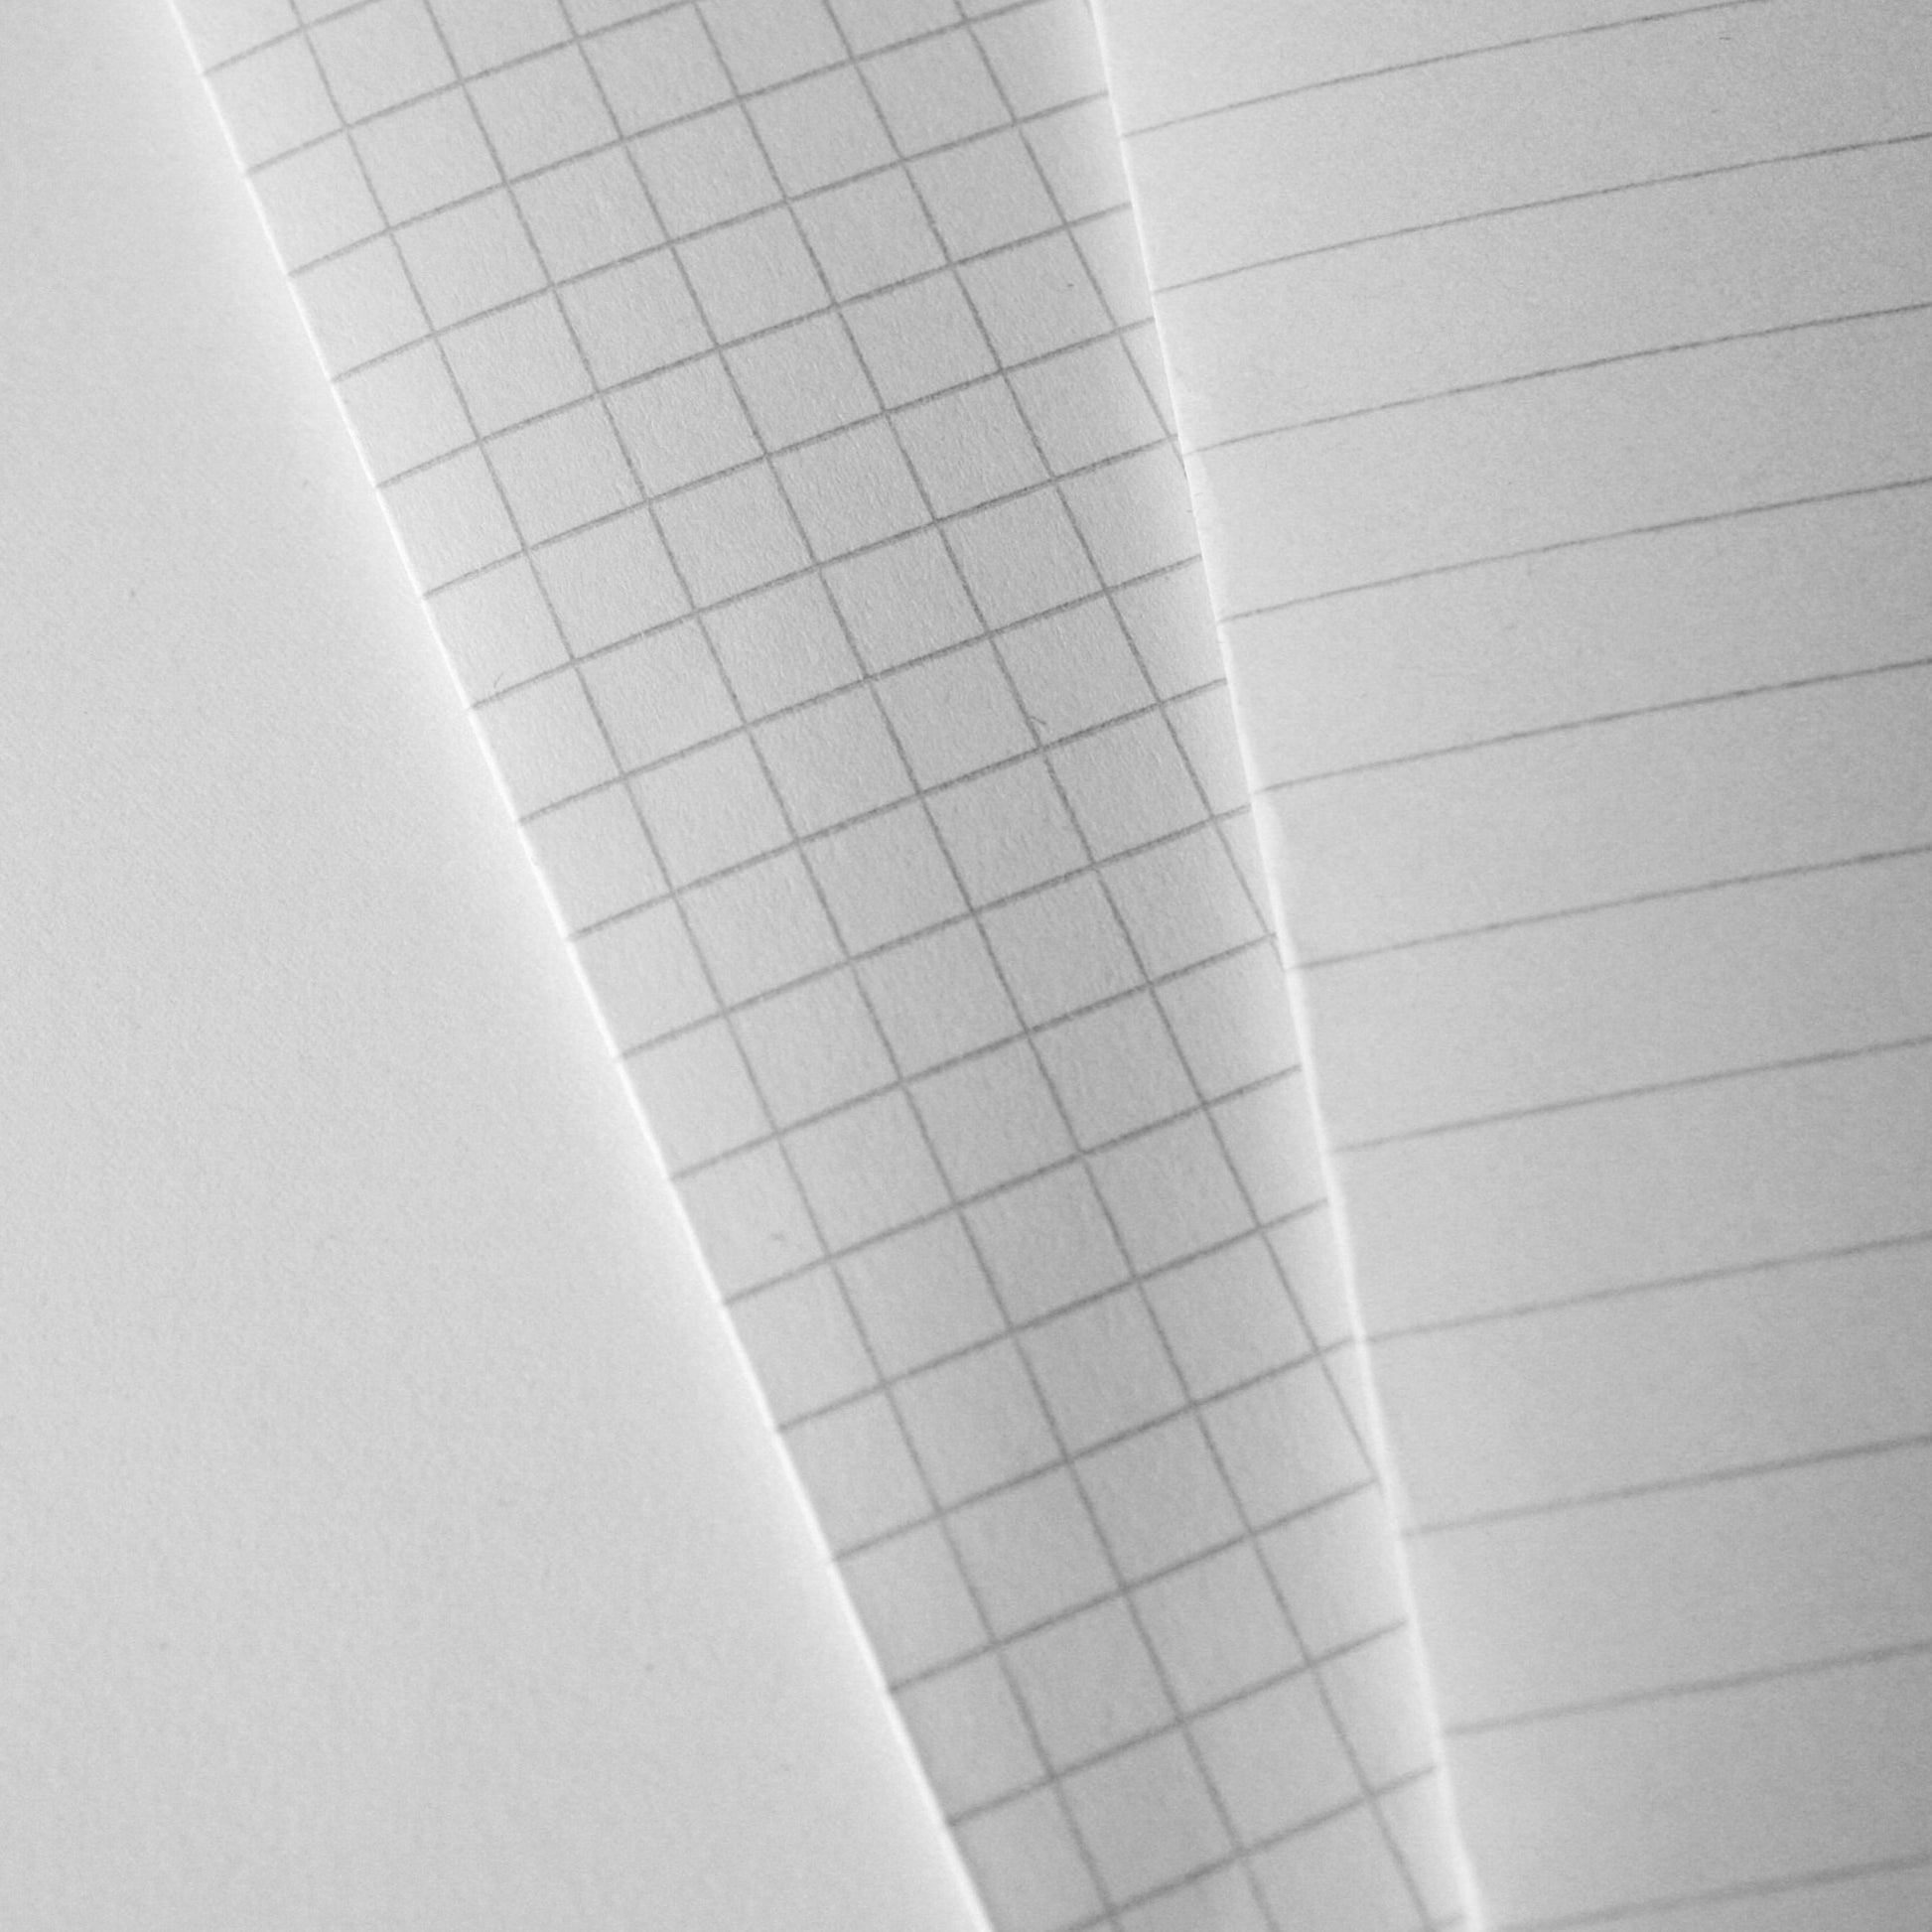 notebook inside pages